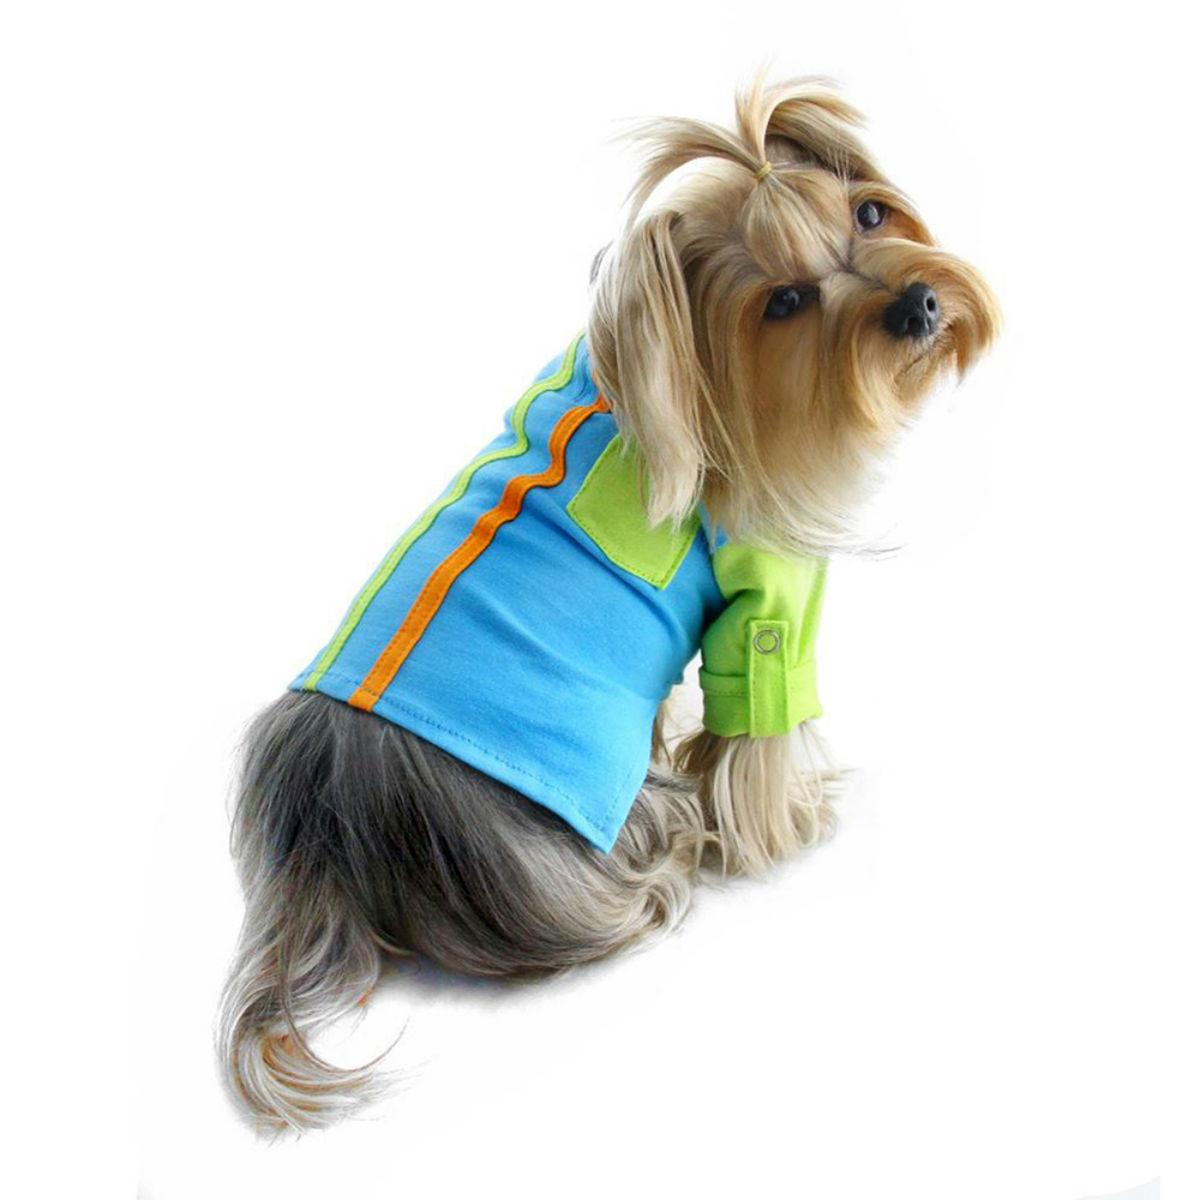 Klippo Contrast Dog Shirt with Roll-up Sleeves